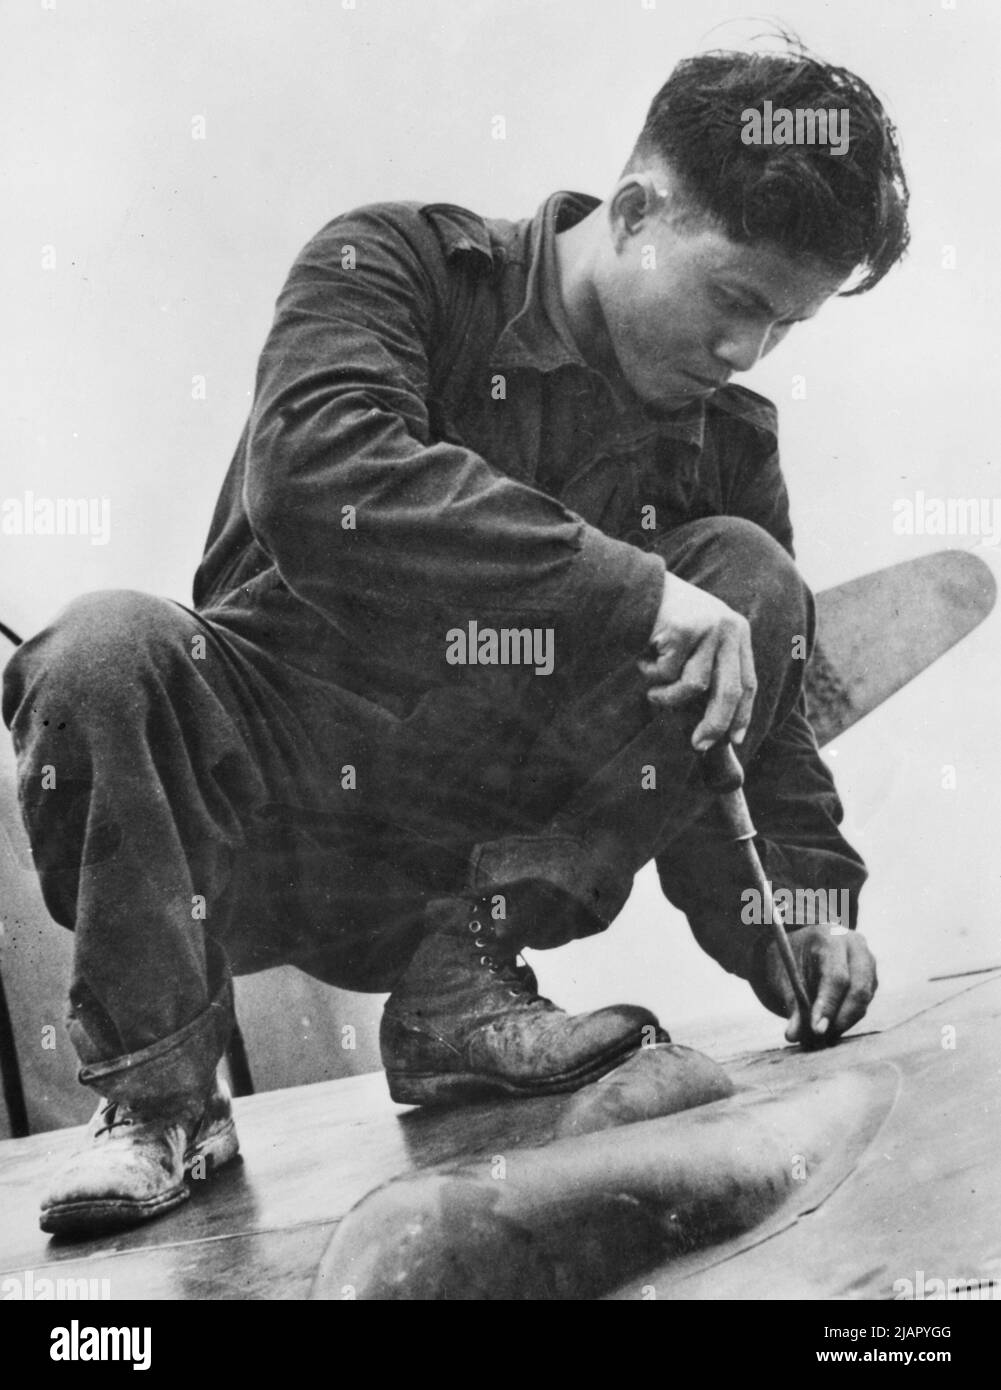 Original caption: During the campaign in Malaya, preparations were being made behind the lines to prevent equipment from falling into the hands of the advancing Japanese troops. At a Netherlands fighter squadron, a Javanese member of the ground staff closes one of the gun-bay panels on a Dutch Brewster Buffalo fighter ca.  January 1942 Stock Photo